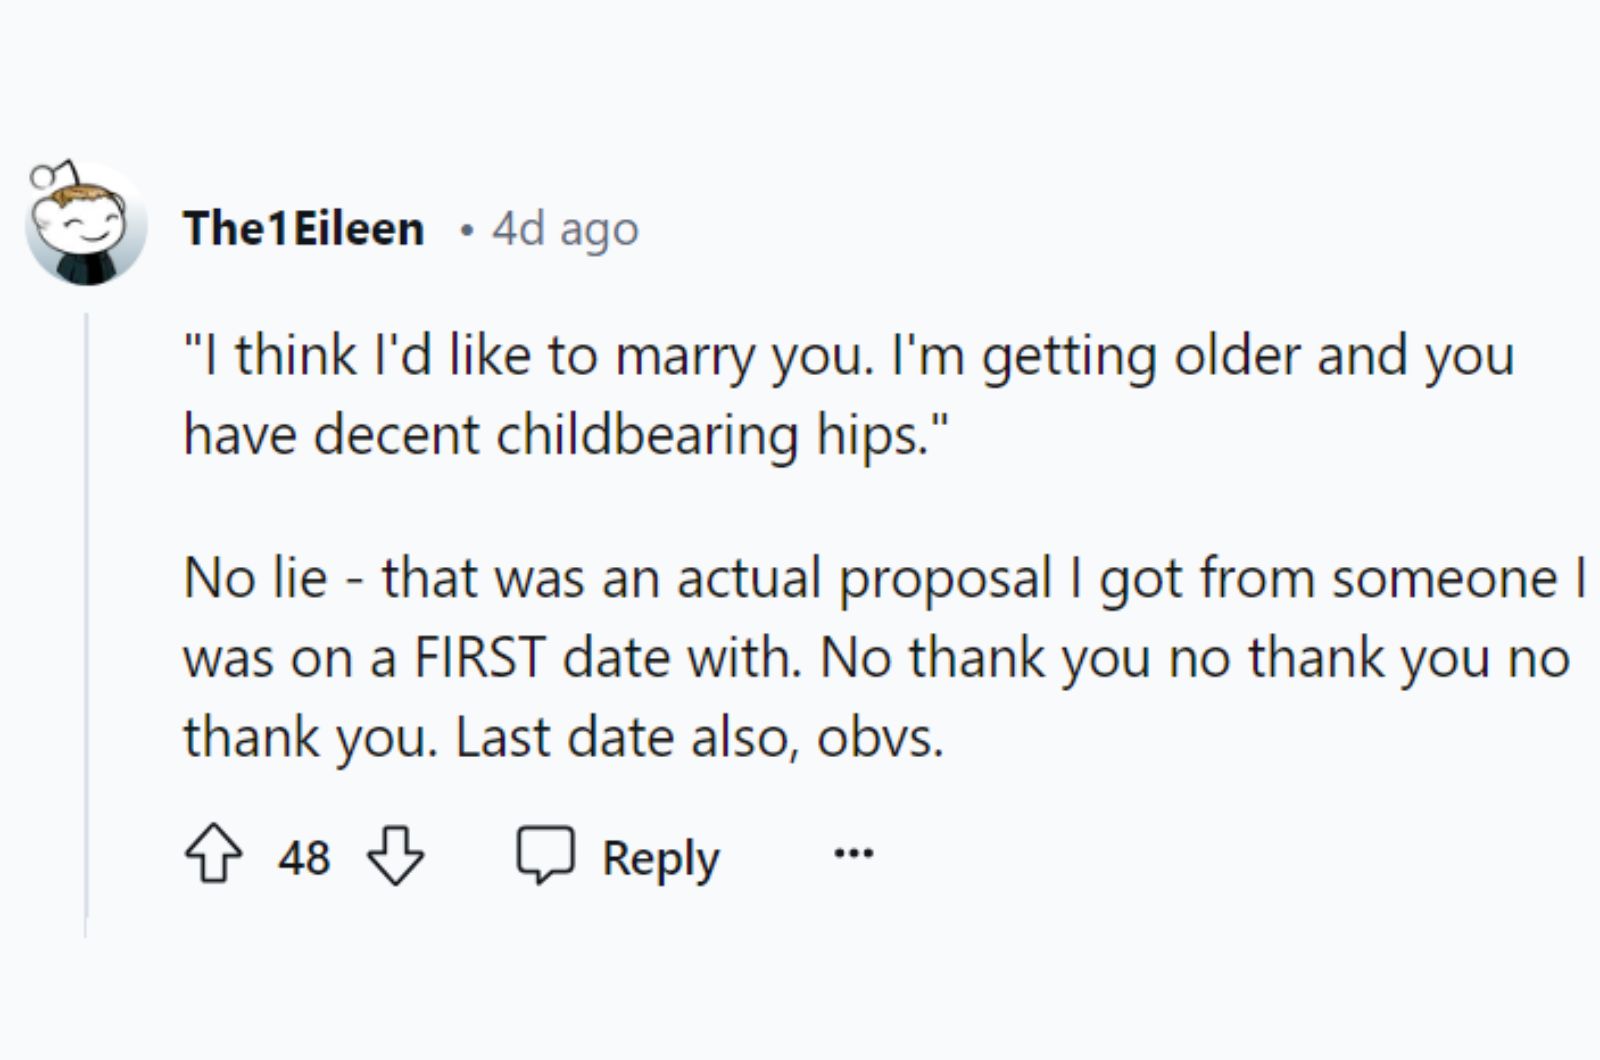 proposal on a first date